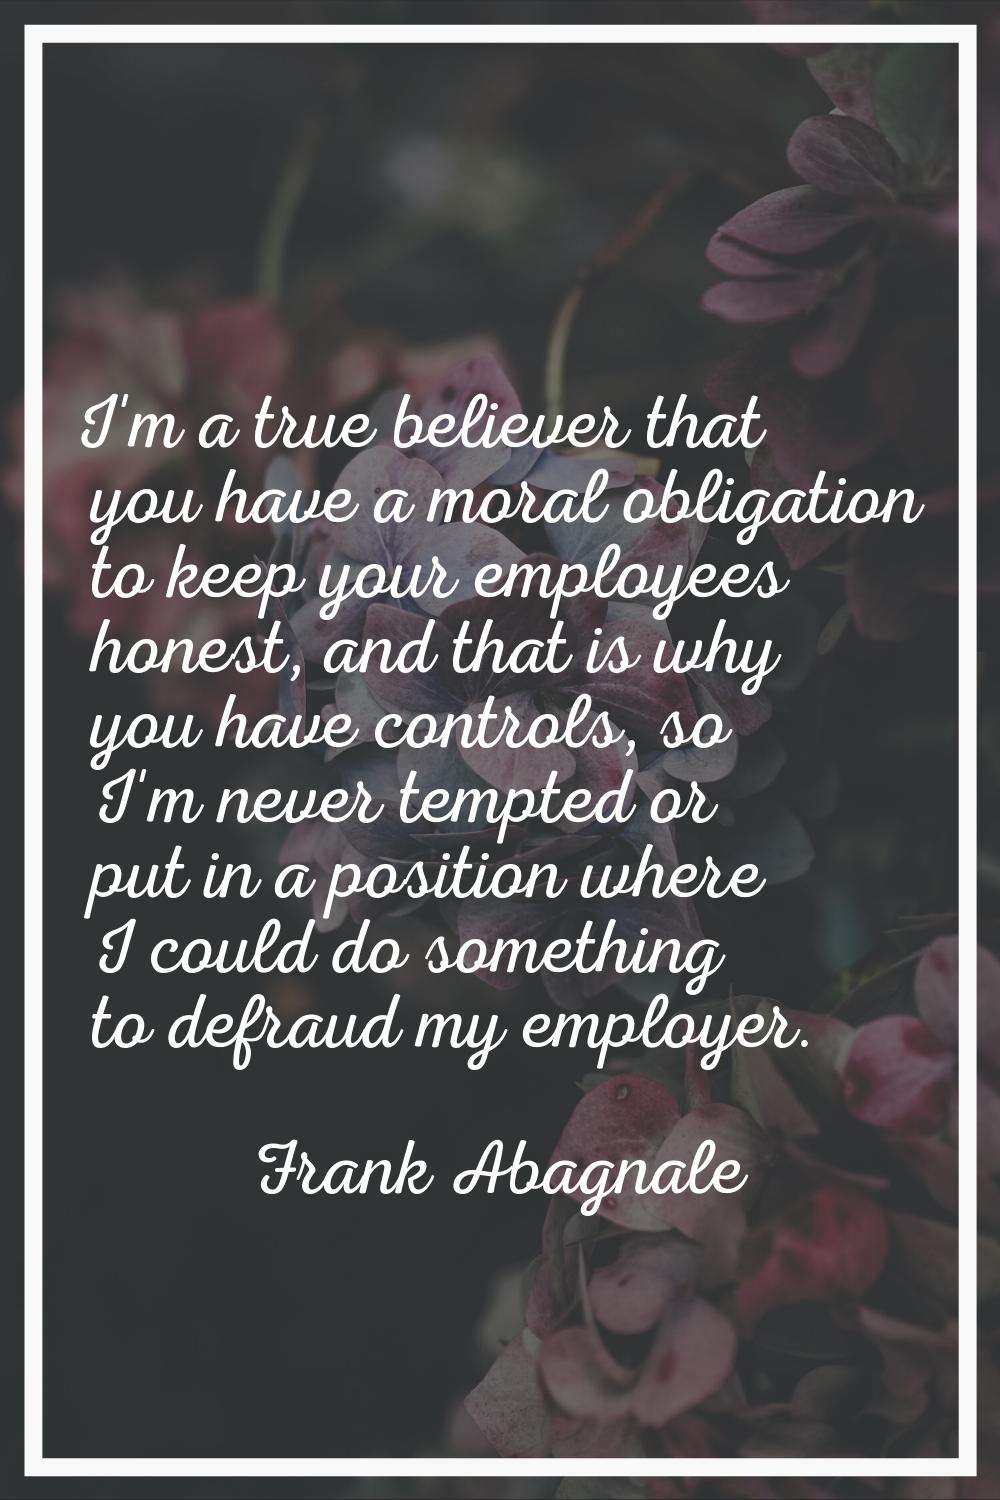 I'm a true believer that you have a moral obligation to keep your employees honest, and that is why